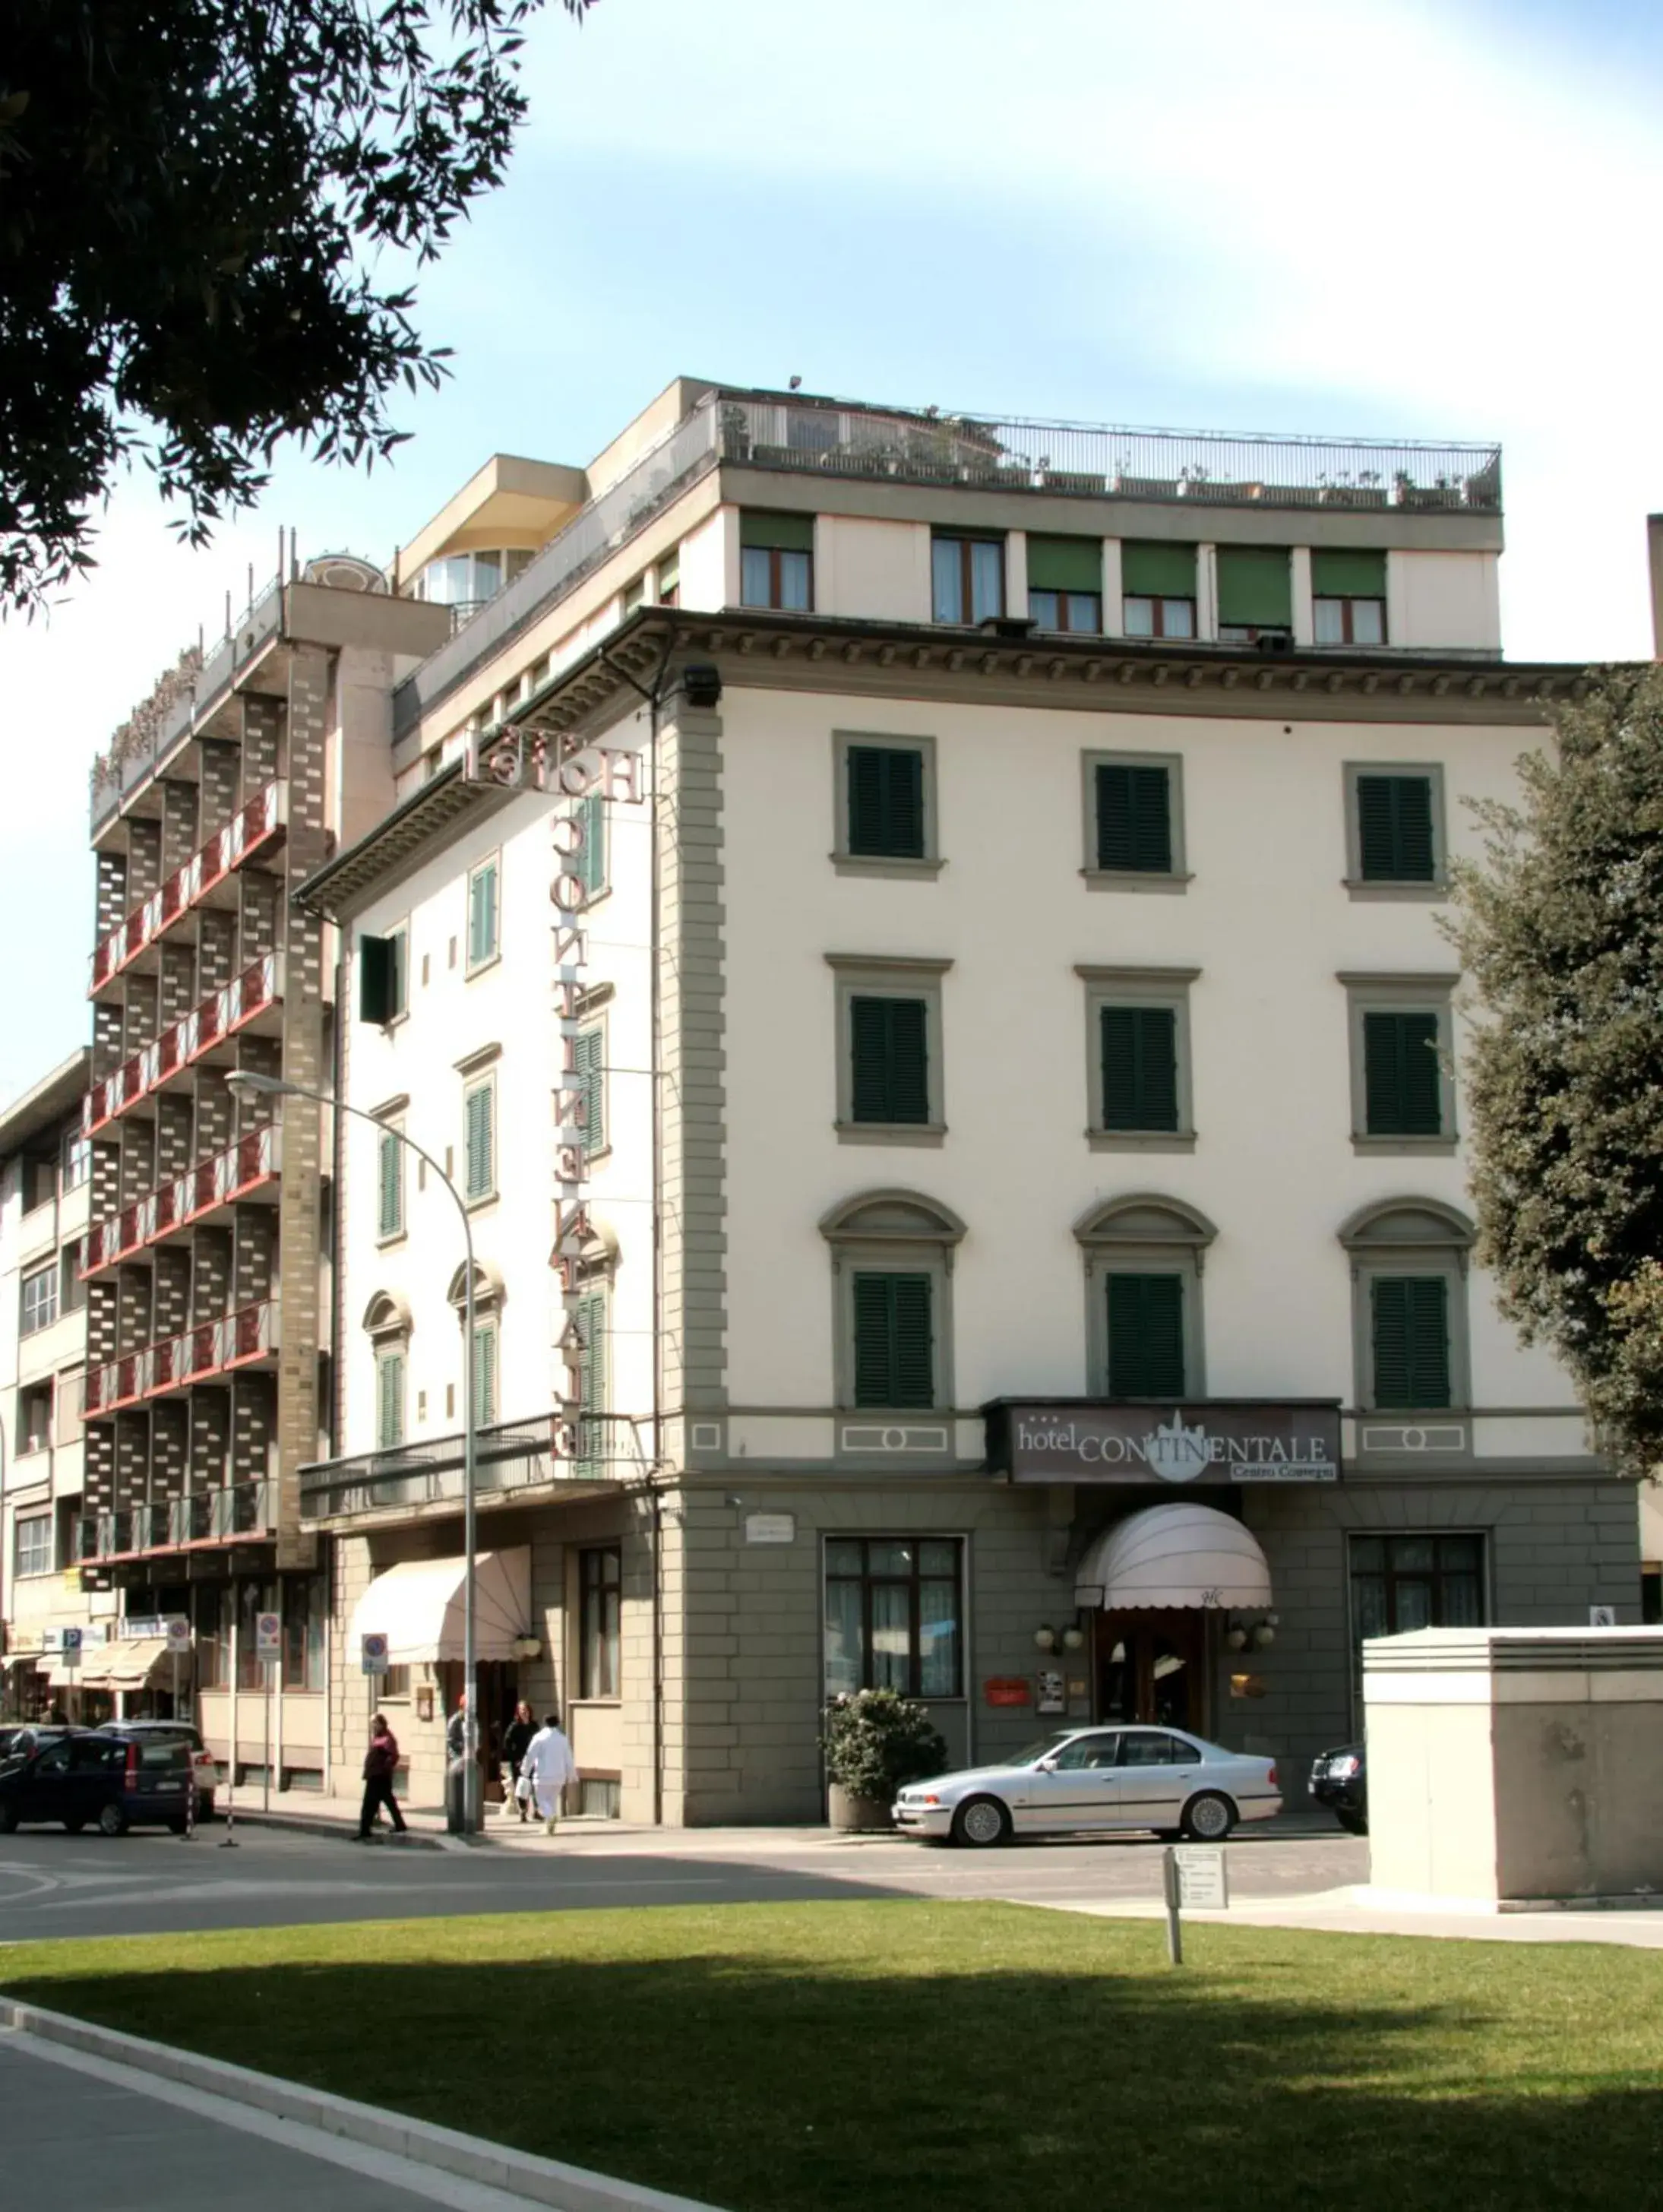 Property Building in Hotel Continentale